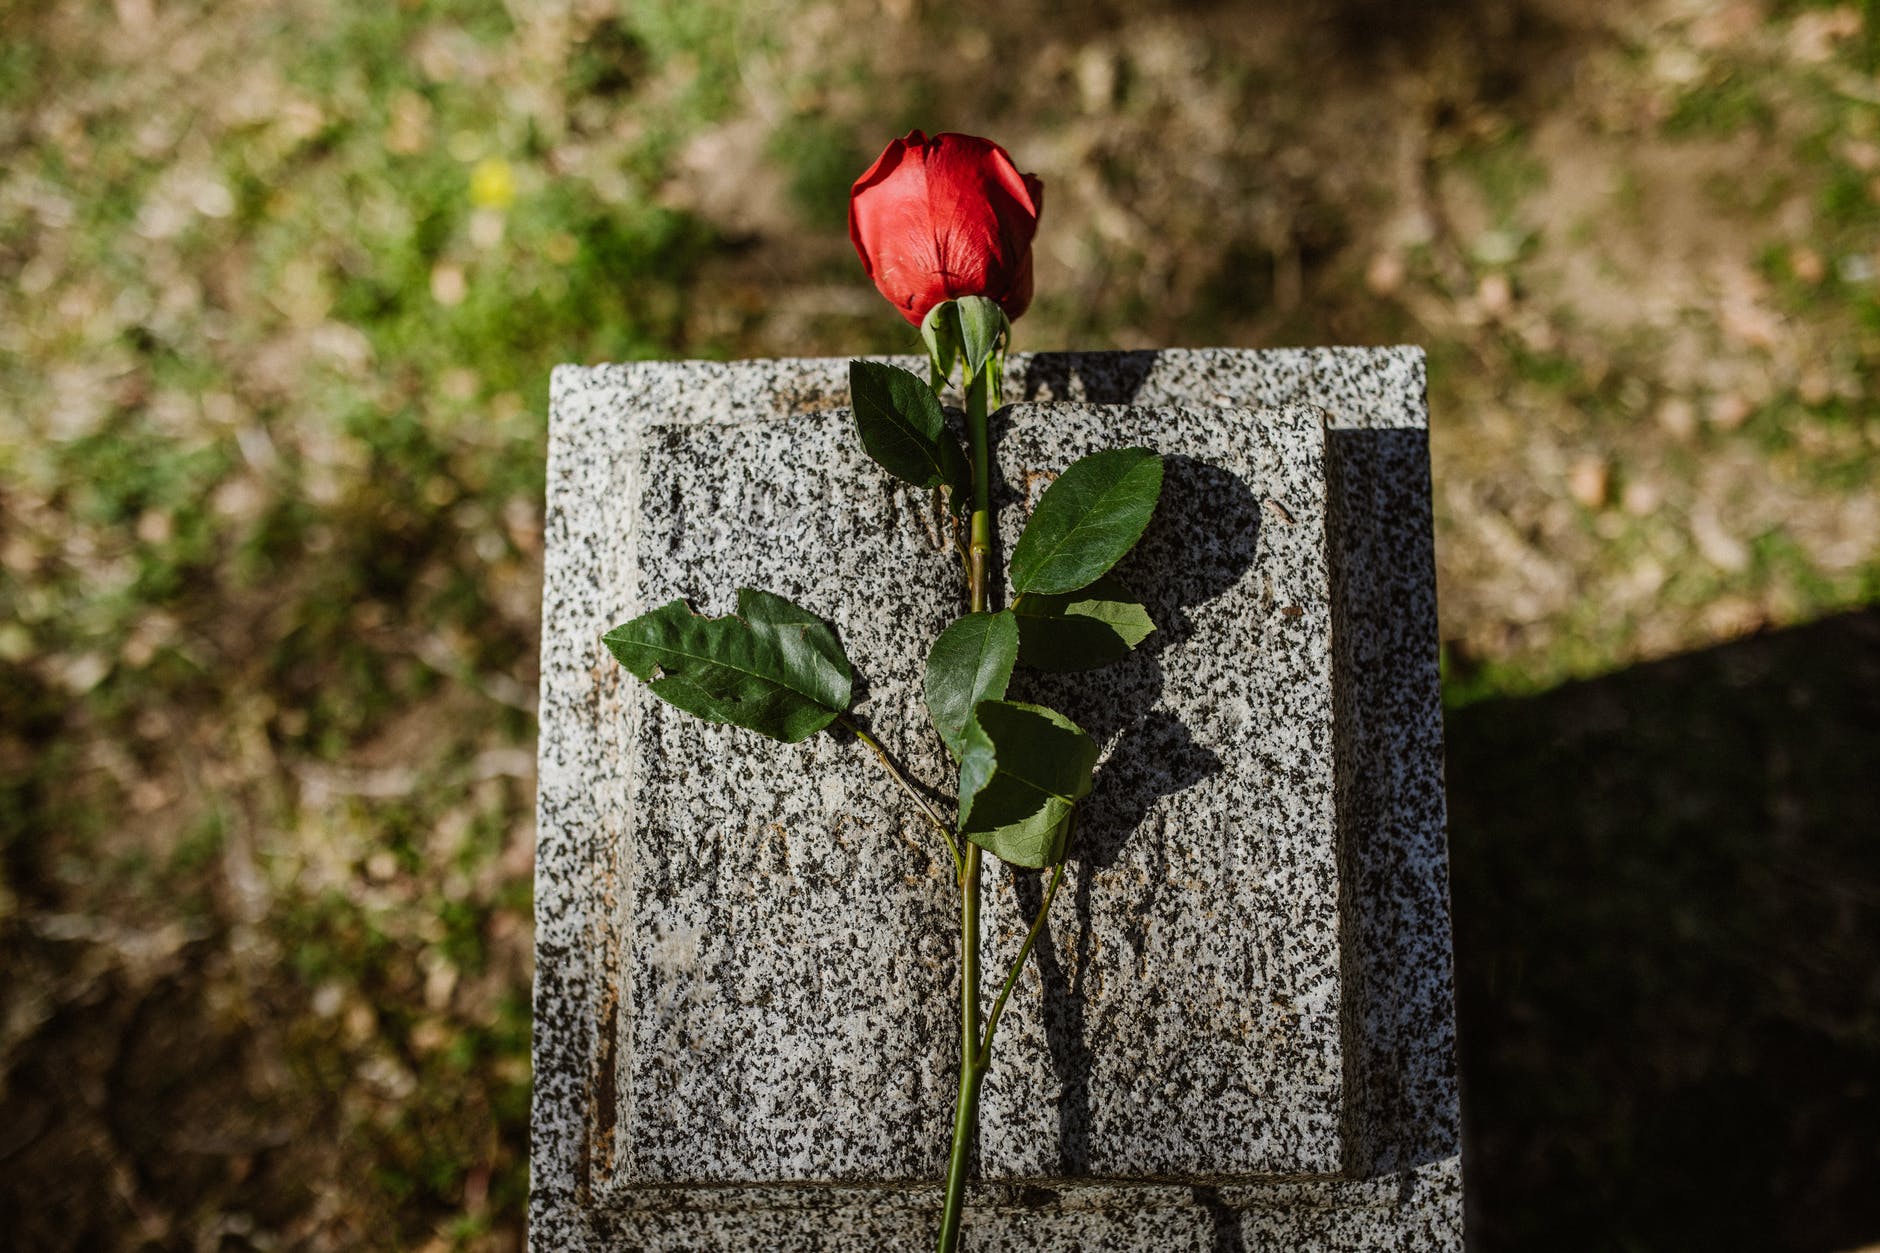 They went to see his mother's tombstone. | Source: Pexels